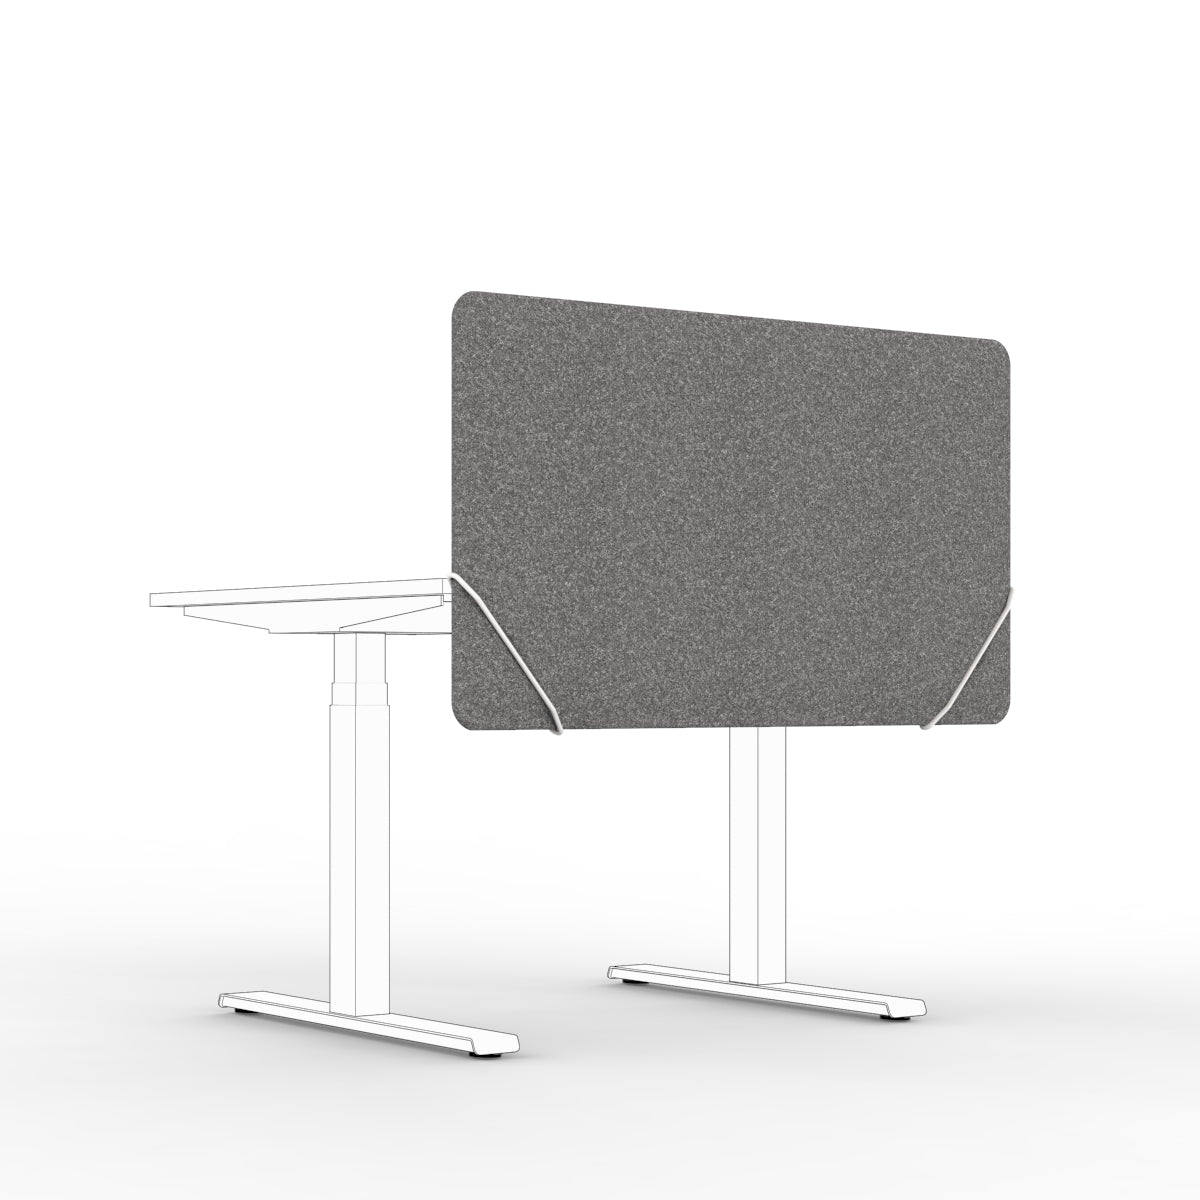 Table screen sound absorber in dark grey wool felt with white slide on table mounts. 